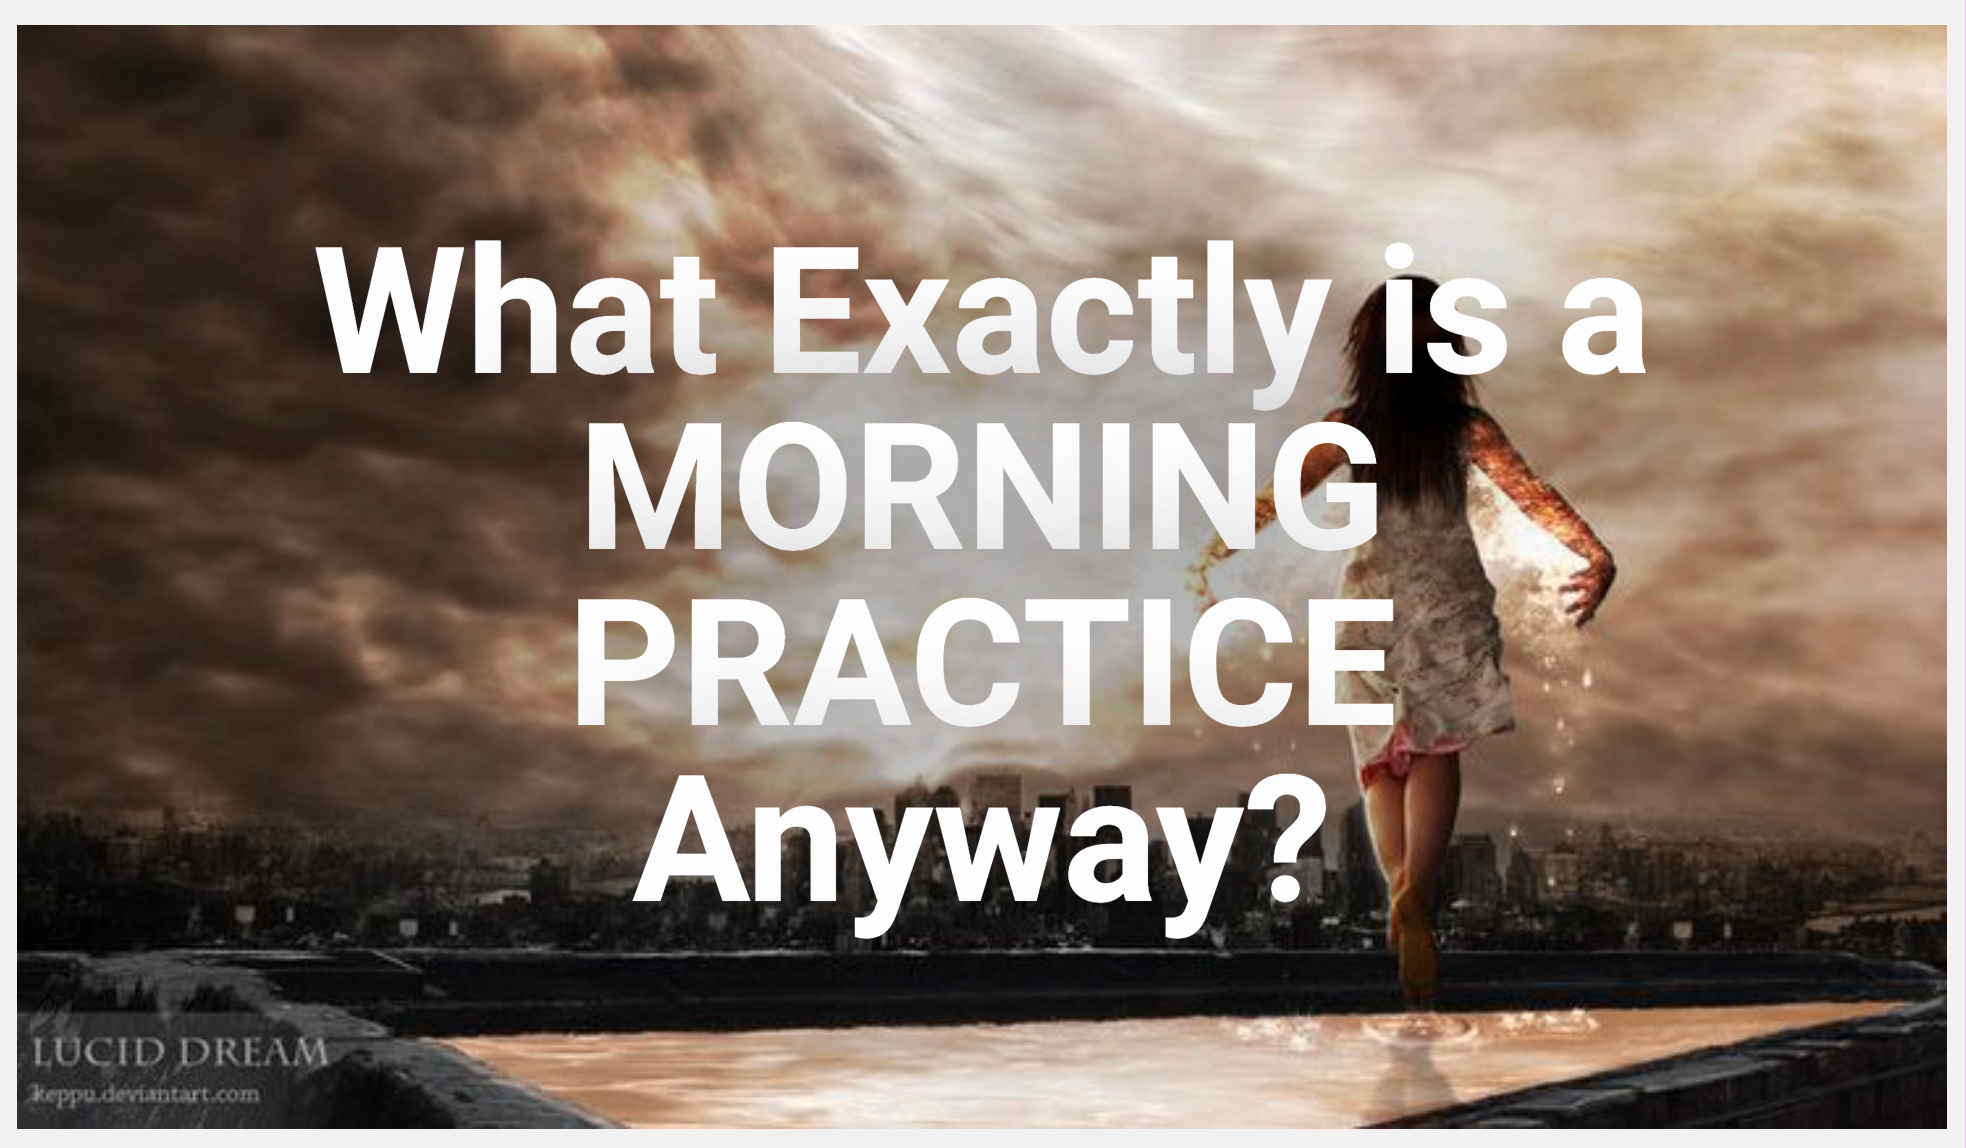 What Exactly is a MORNING PRACTICE Anyway?